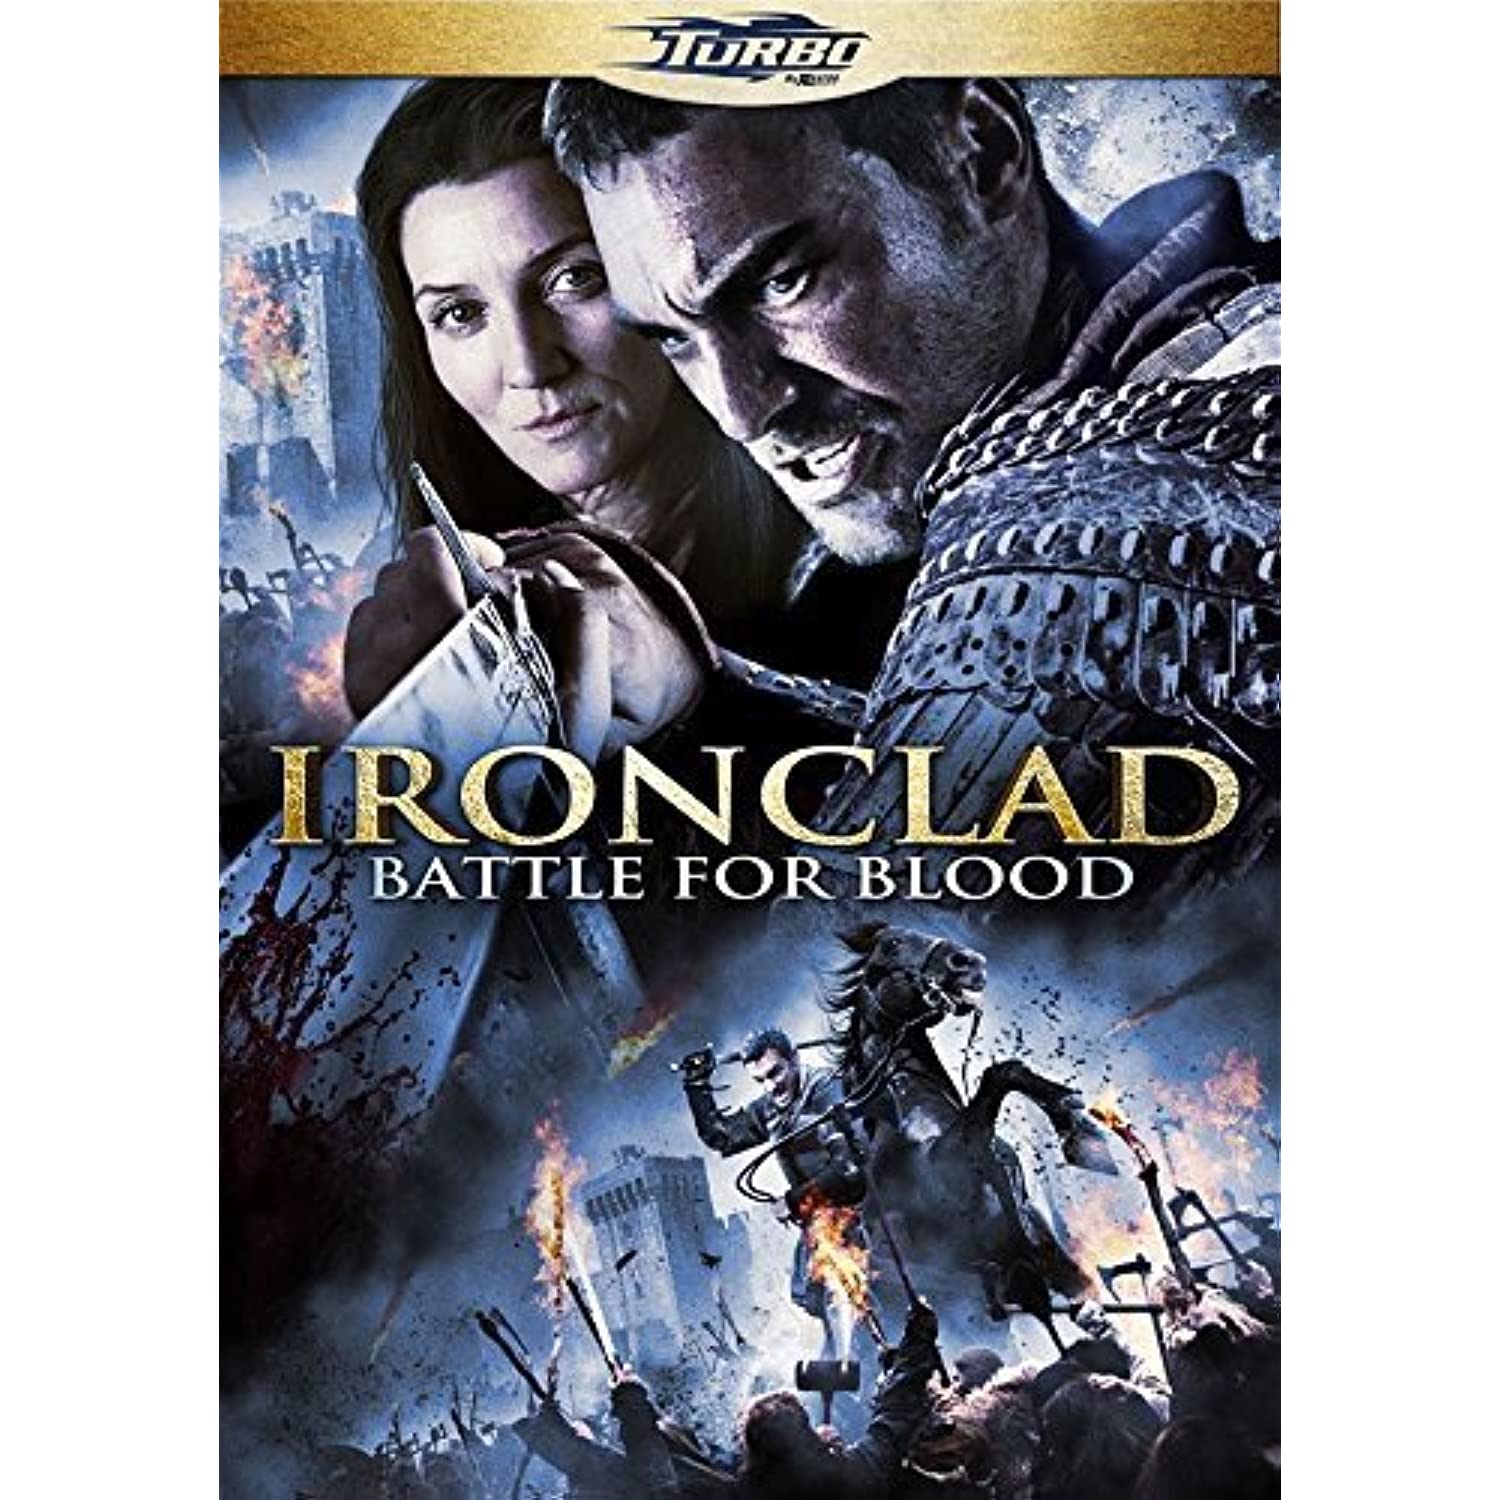 Ironclad: Battle for Blood DVD